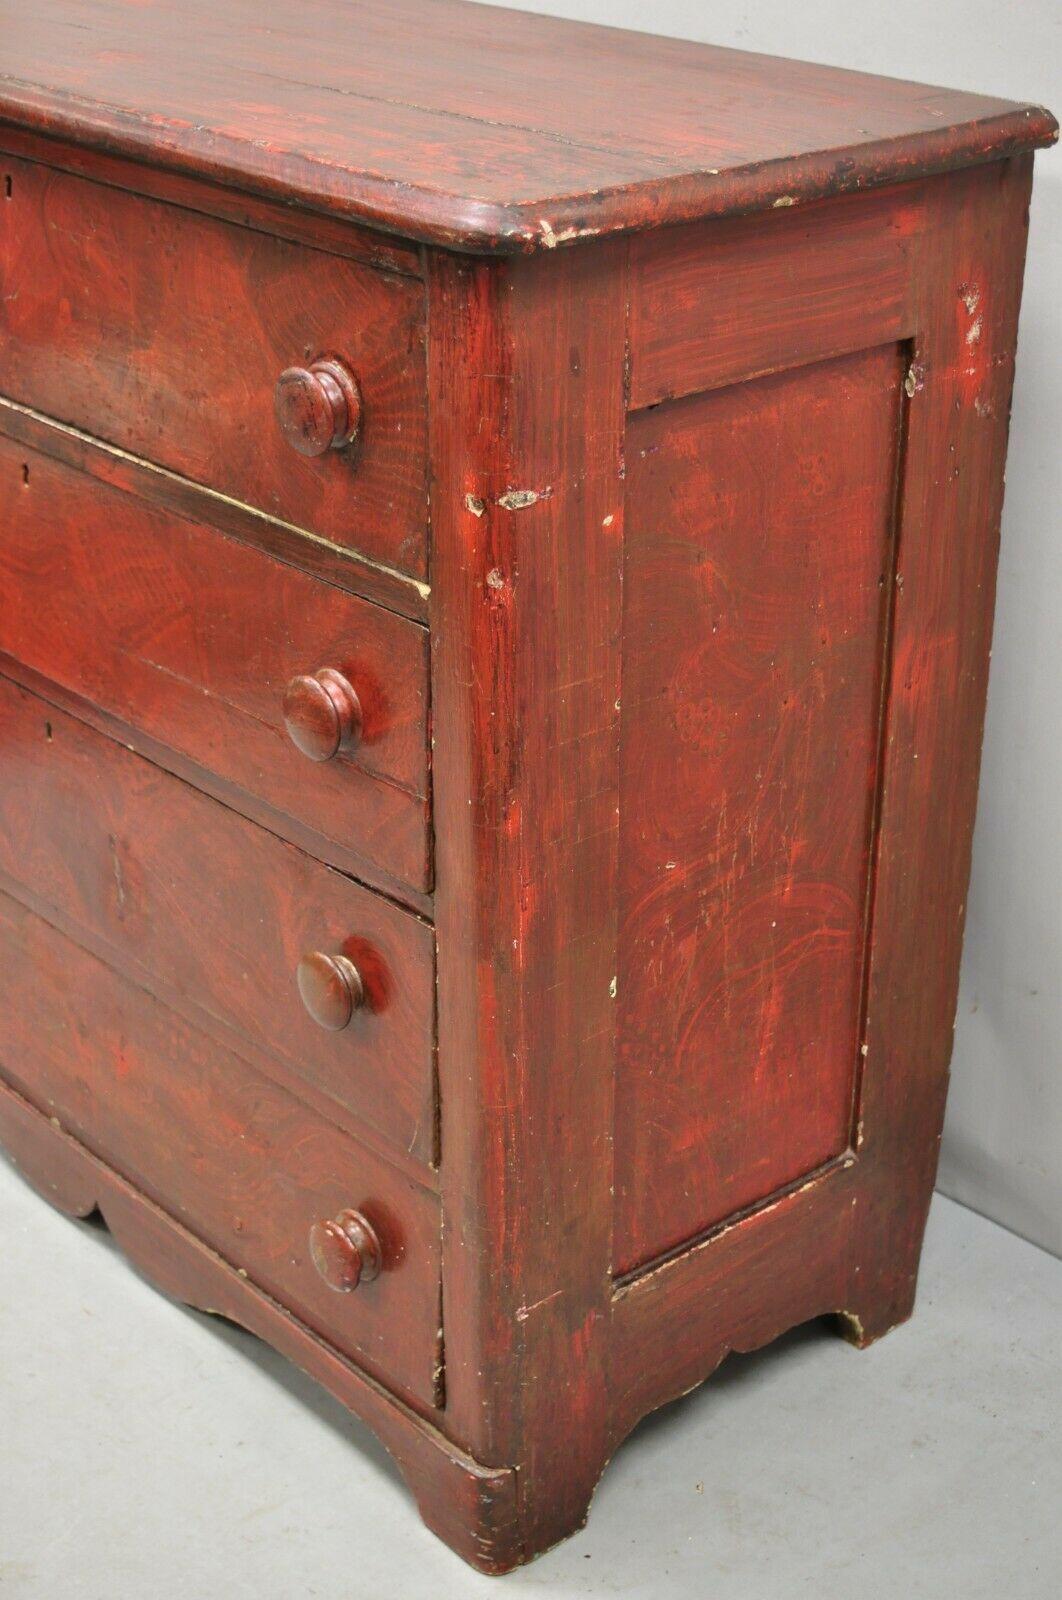 19th Century 19th C Antique Primitive Red Grain Painted 4 Drawer Chest of Drawers Dresser